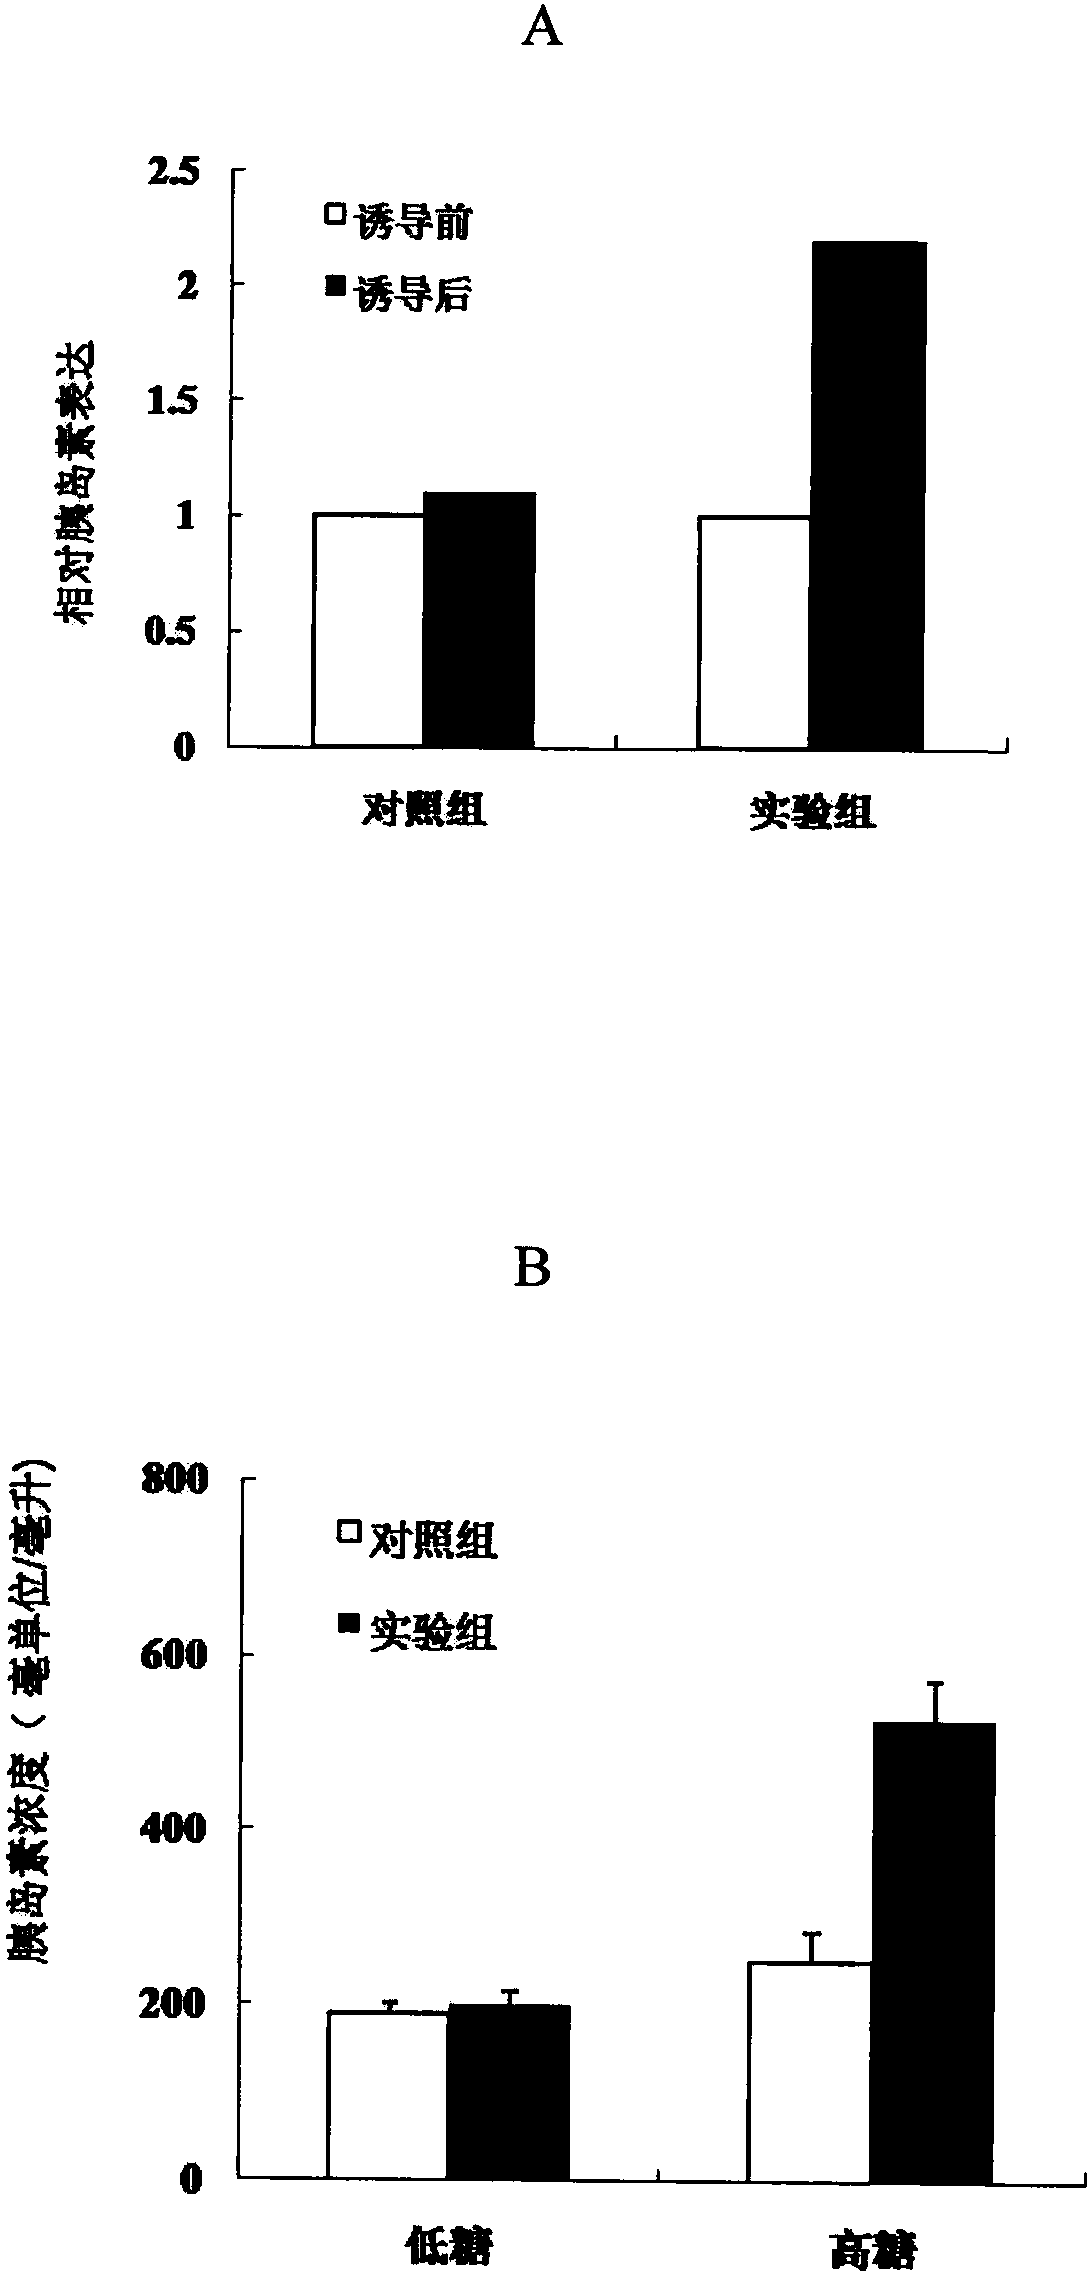 Culture additive for in-vitro induction of stem cells to insulin-secretion cells differentiation maturation and purpose thereof